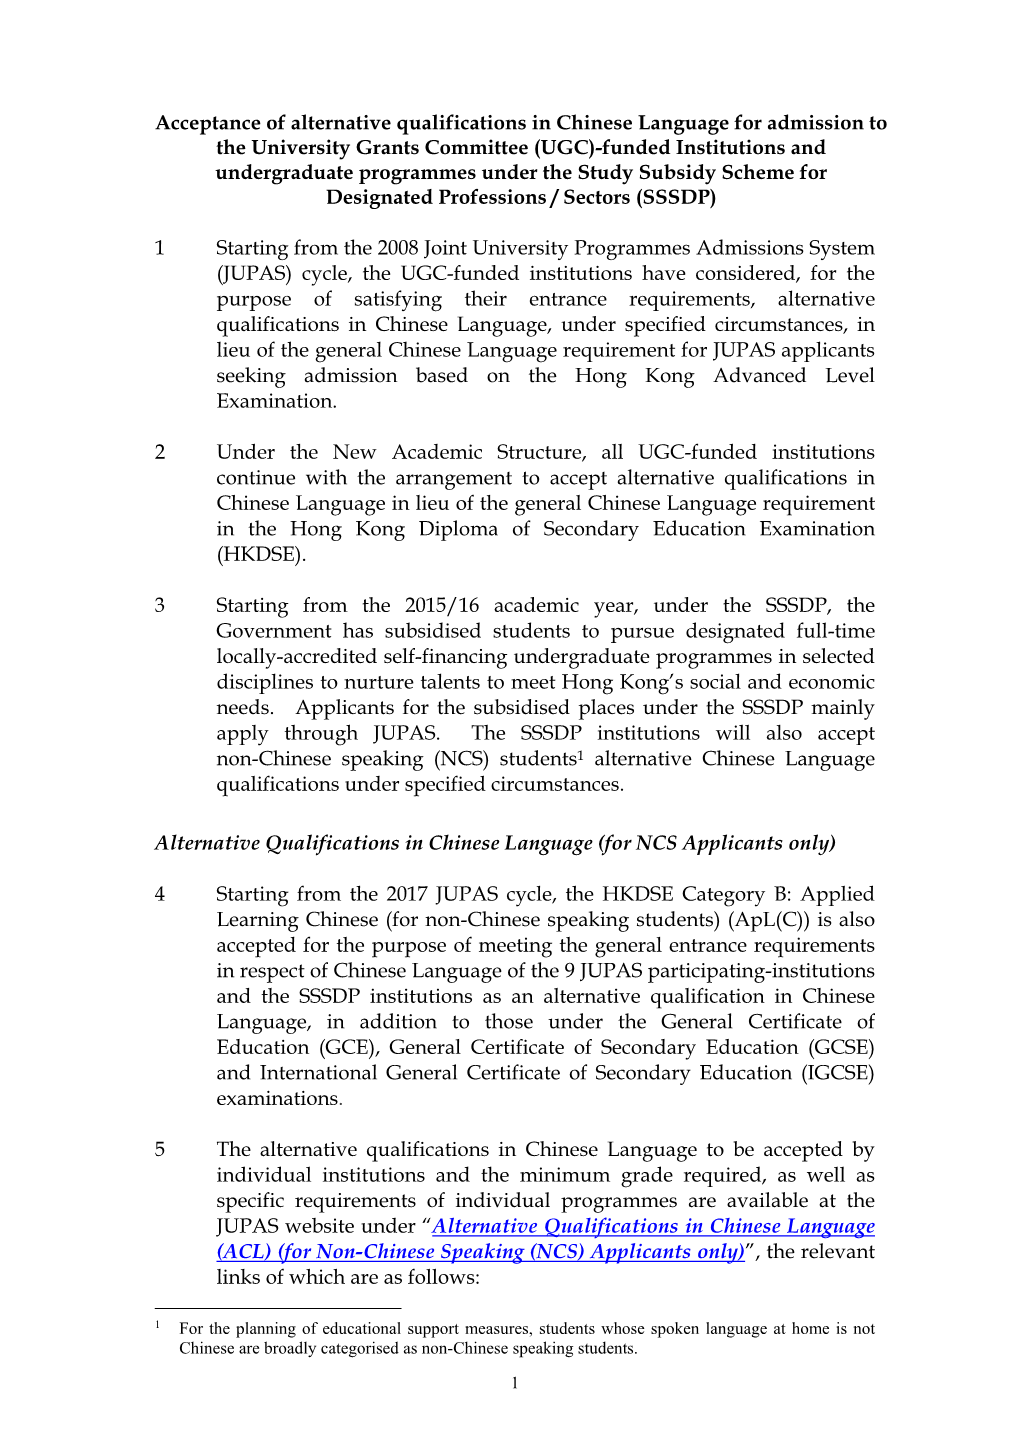 Acceptance of Alternative Qualifications in Chinese Language for Admission to the University Grants Committee